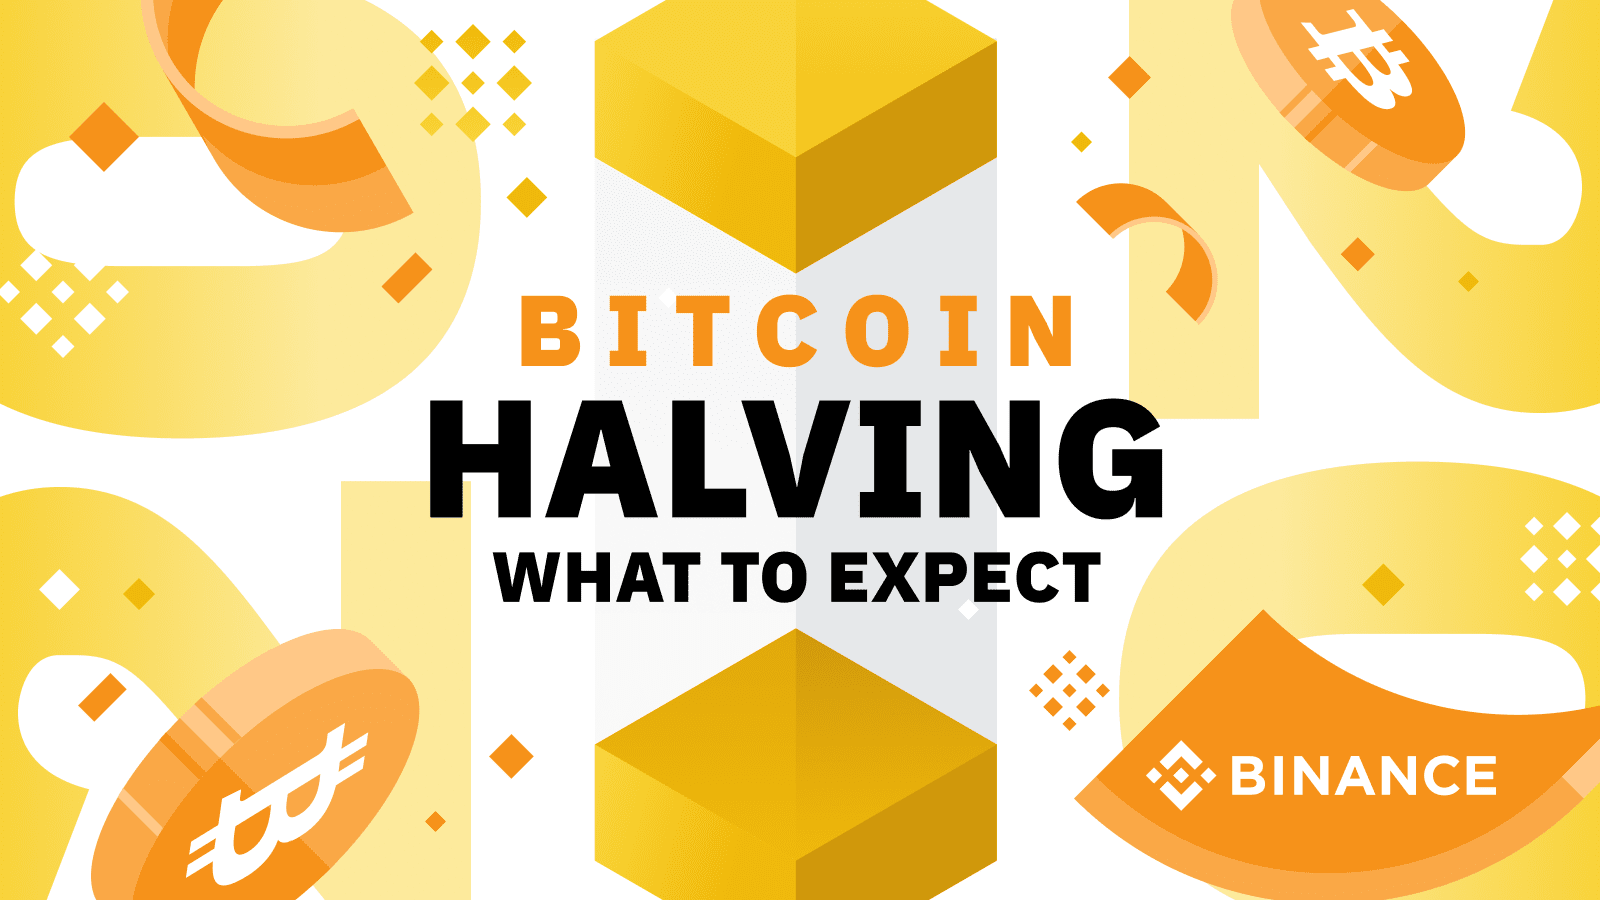 Get Ready? CZ Binance Predicts Bitcoin Will Hit Multiple ATH After the Halving